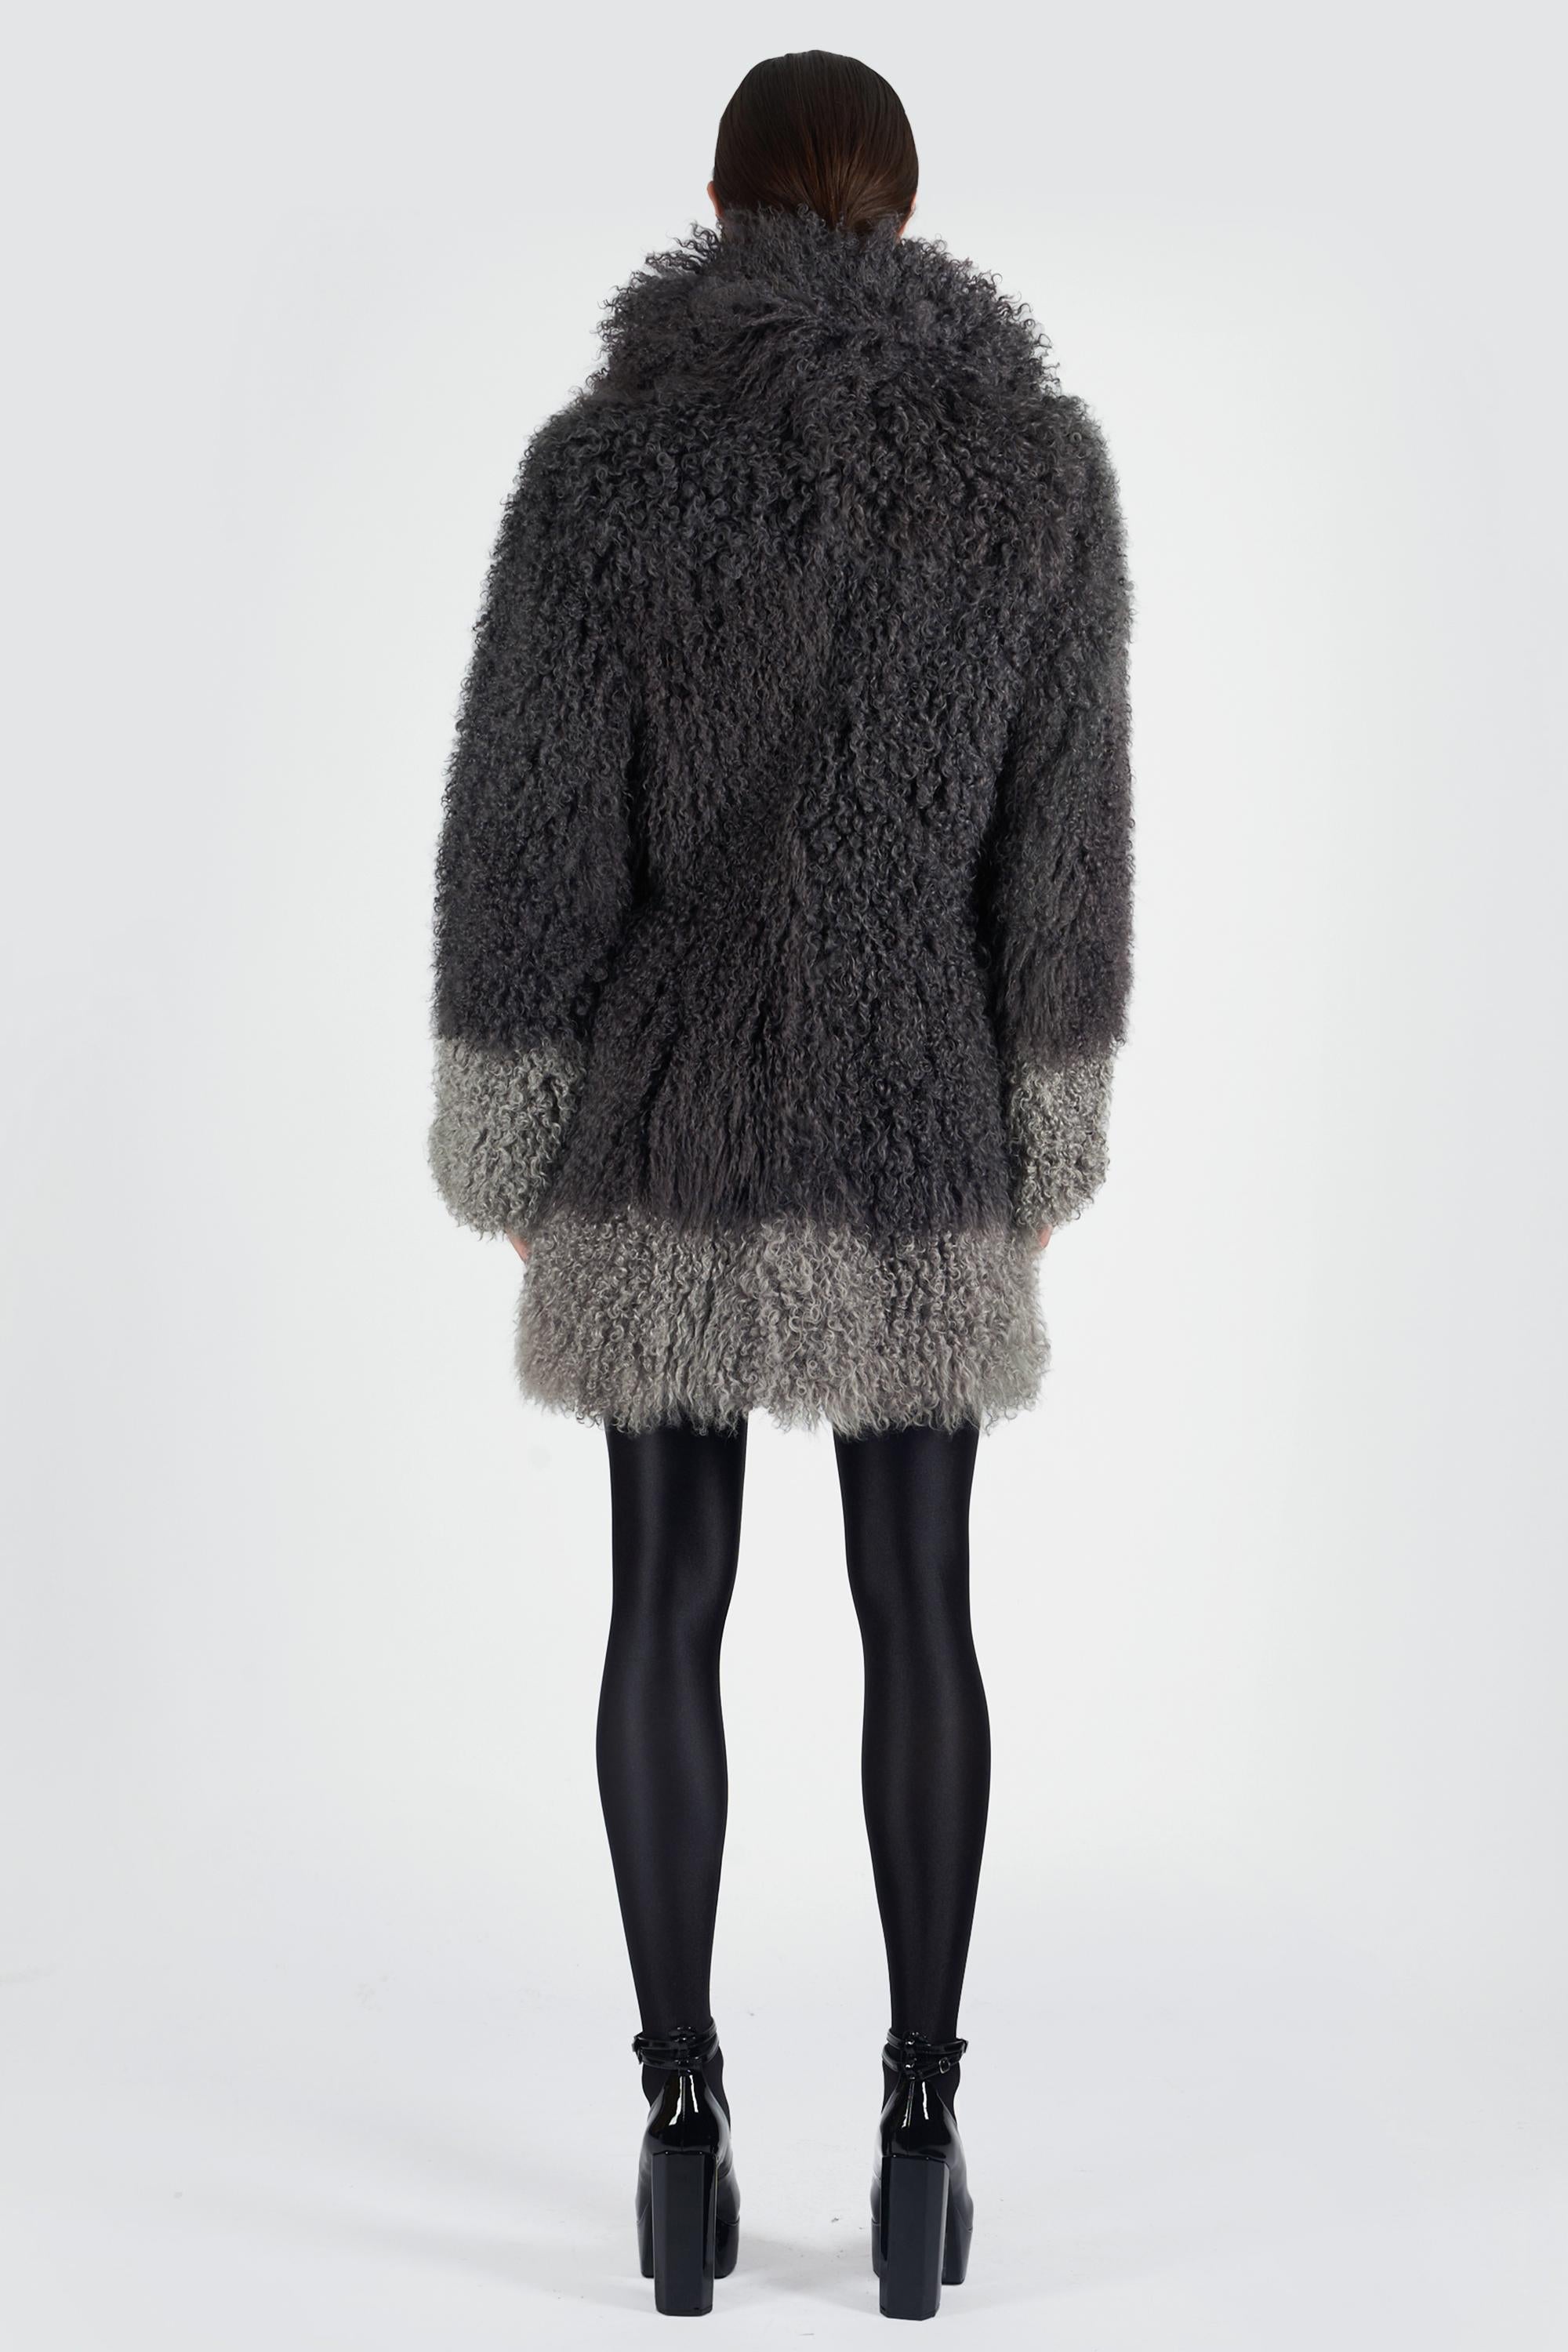 We are very excited to present this Le Sentier Vintage 1990’s two tone shaggy fur coat. Features a large lapel, hooks for closure and grey fur. In excellent vintage condition. Authenticity guaranteed.

Label size: N/A
Modern size: UK: 8 to 12, US: 4